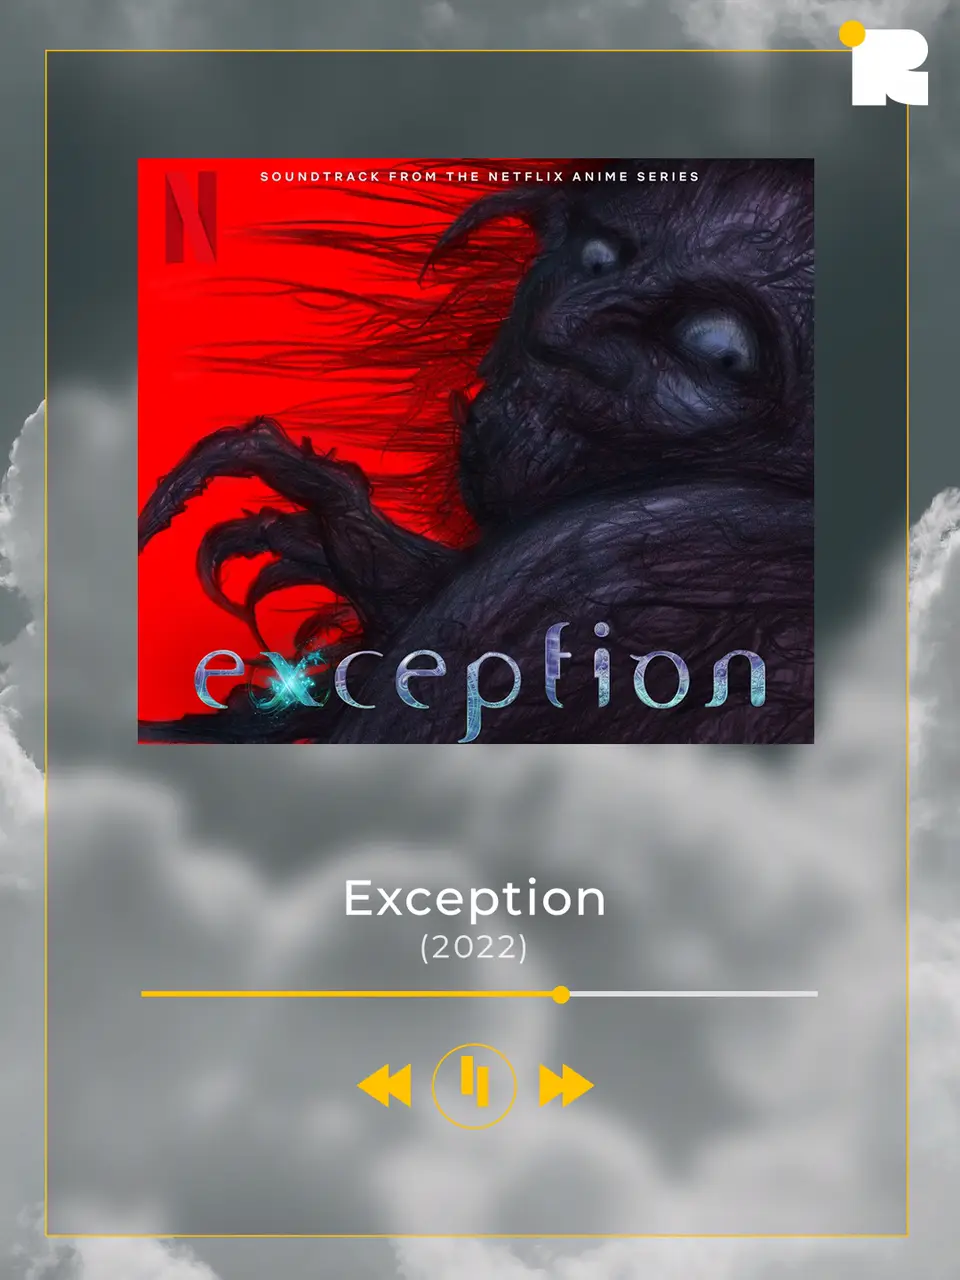 Exception (Soundtrack from the Netflix Anime Series) - Album by Ryuichi  Sakamoto